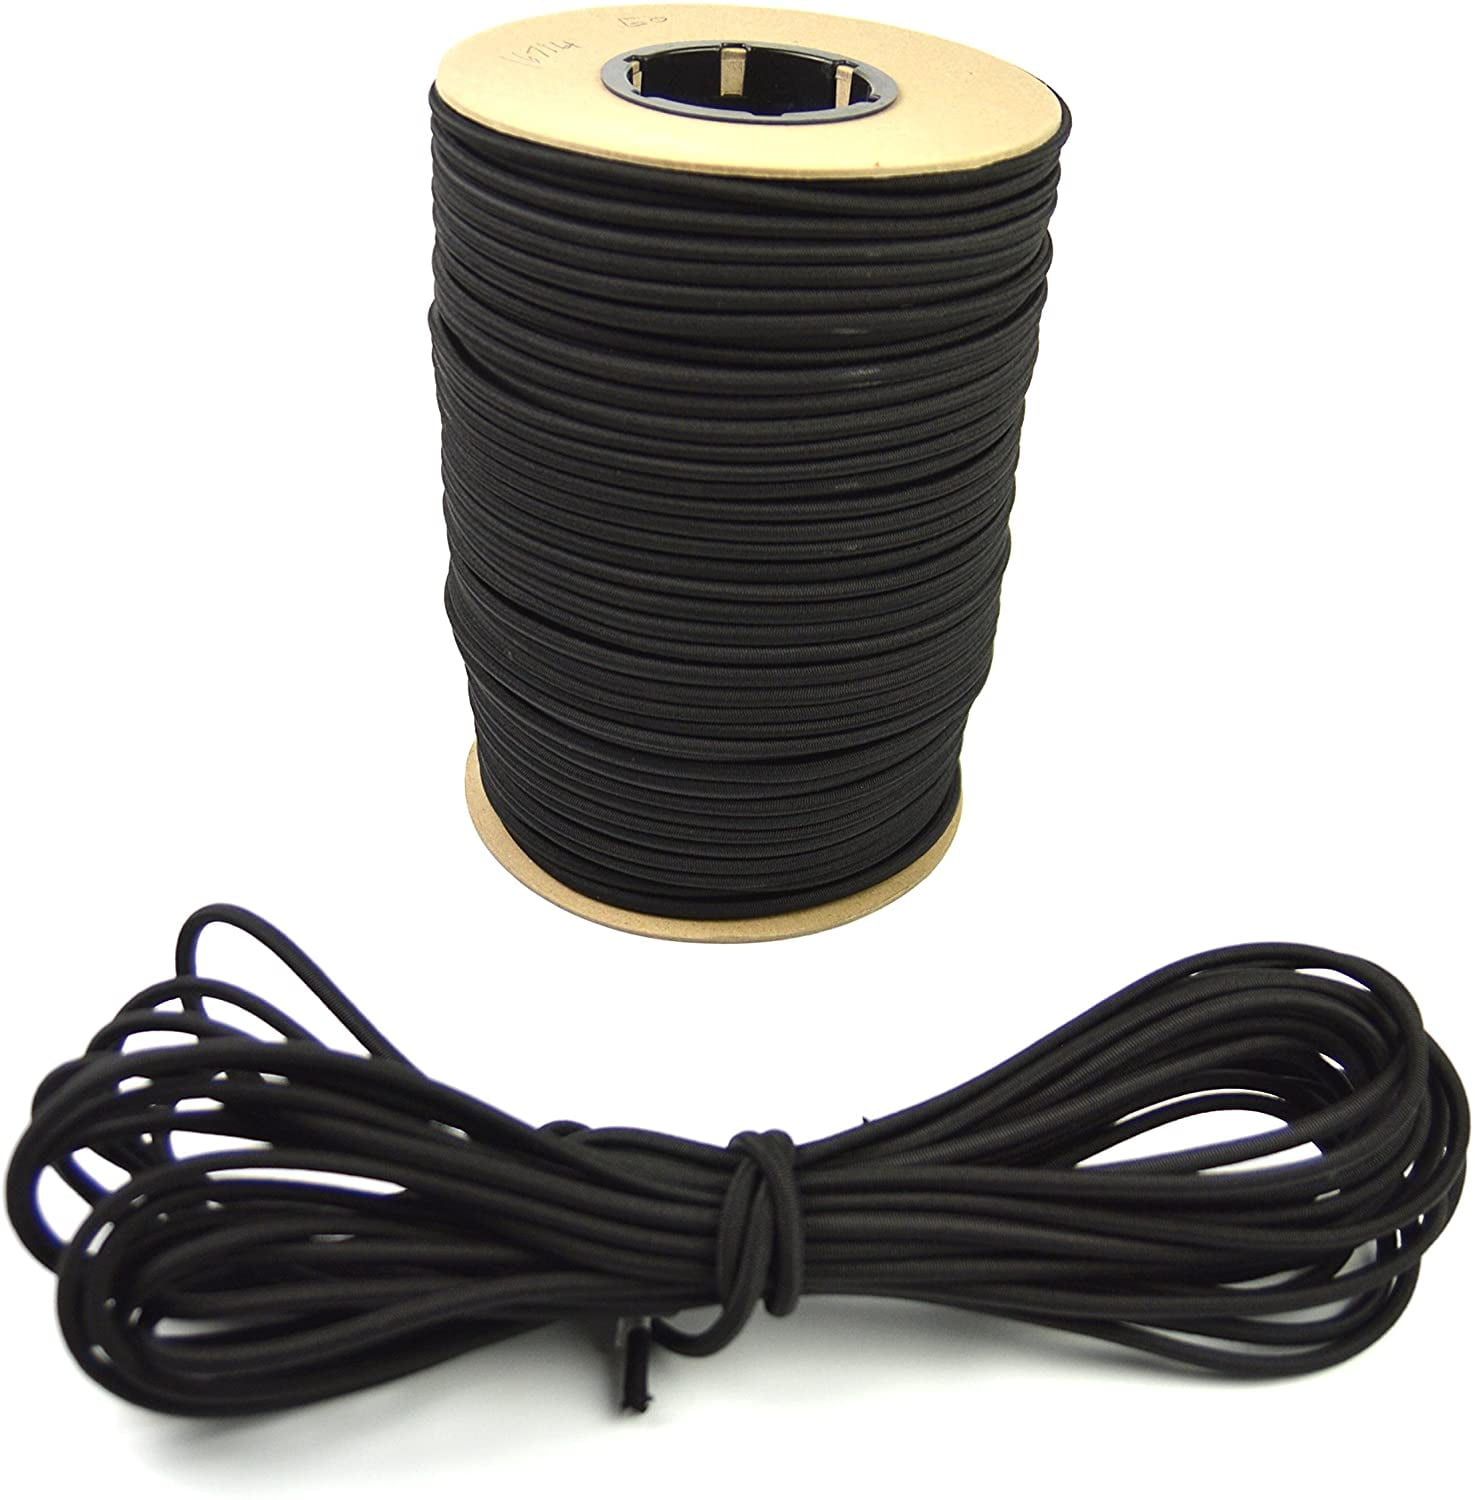 White/Black Nylon Coated Rubber Rope Shock Cord 3/8" X 13' Discounted Bungee 